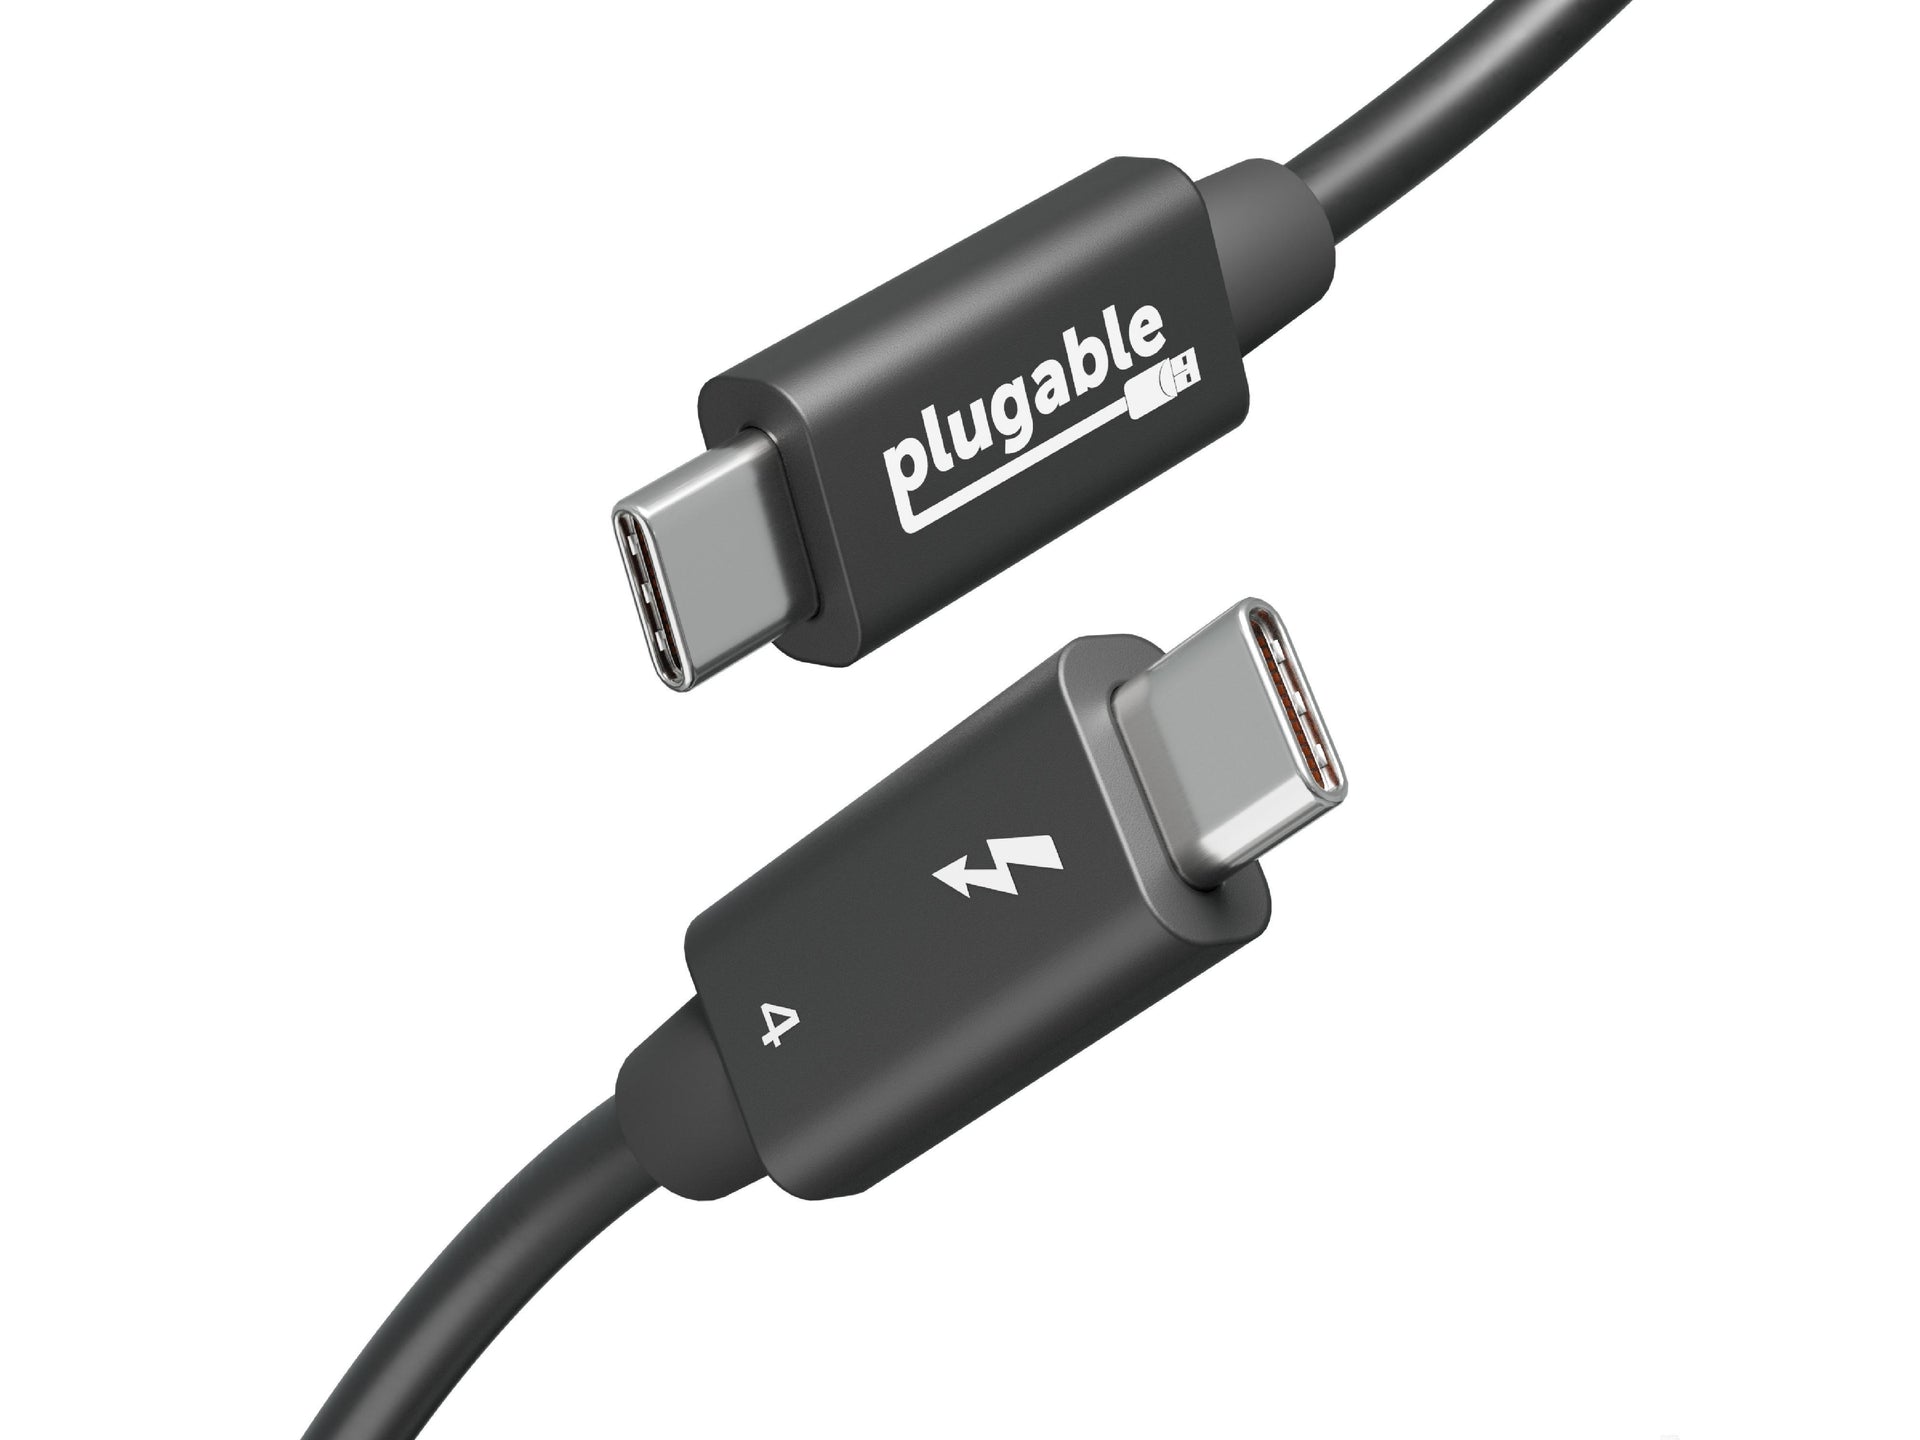 New Original High Quality Thunderbolt 2 Cable Adapter Cord